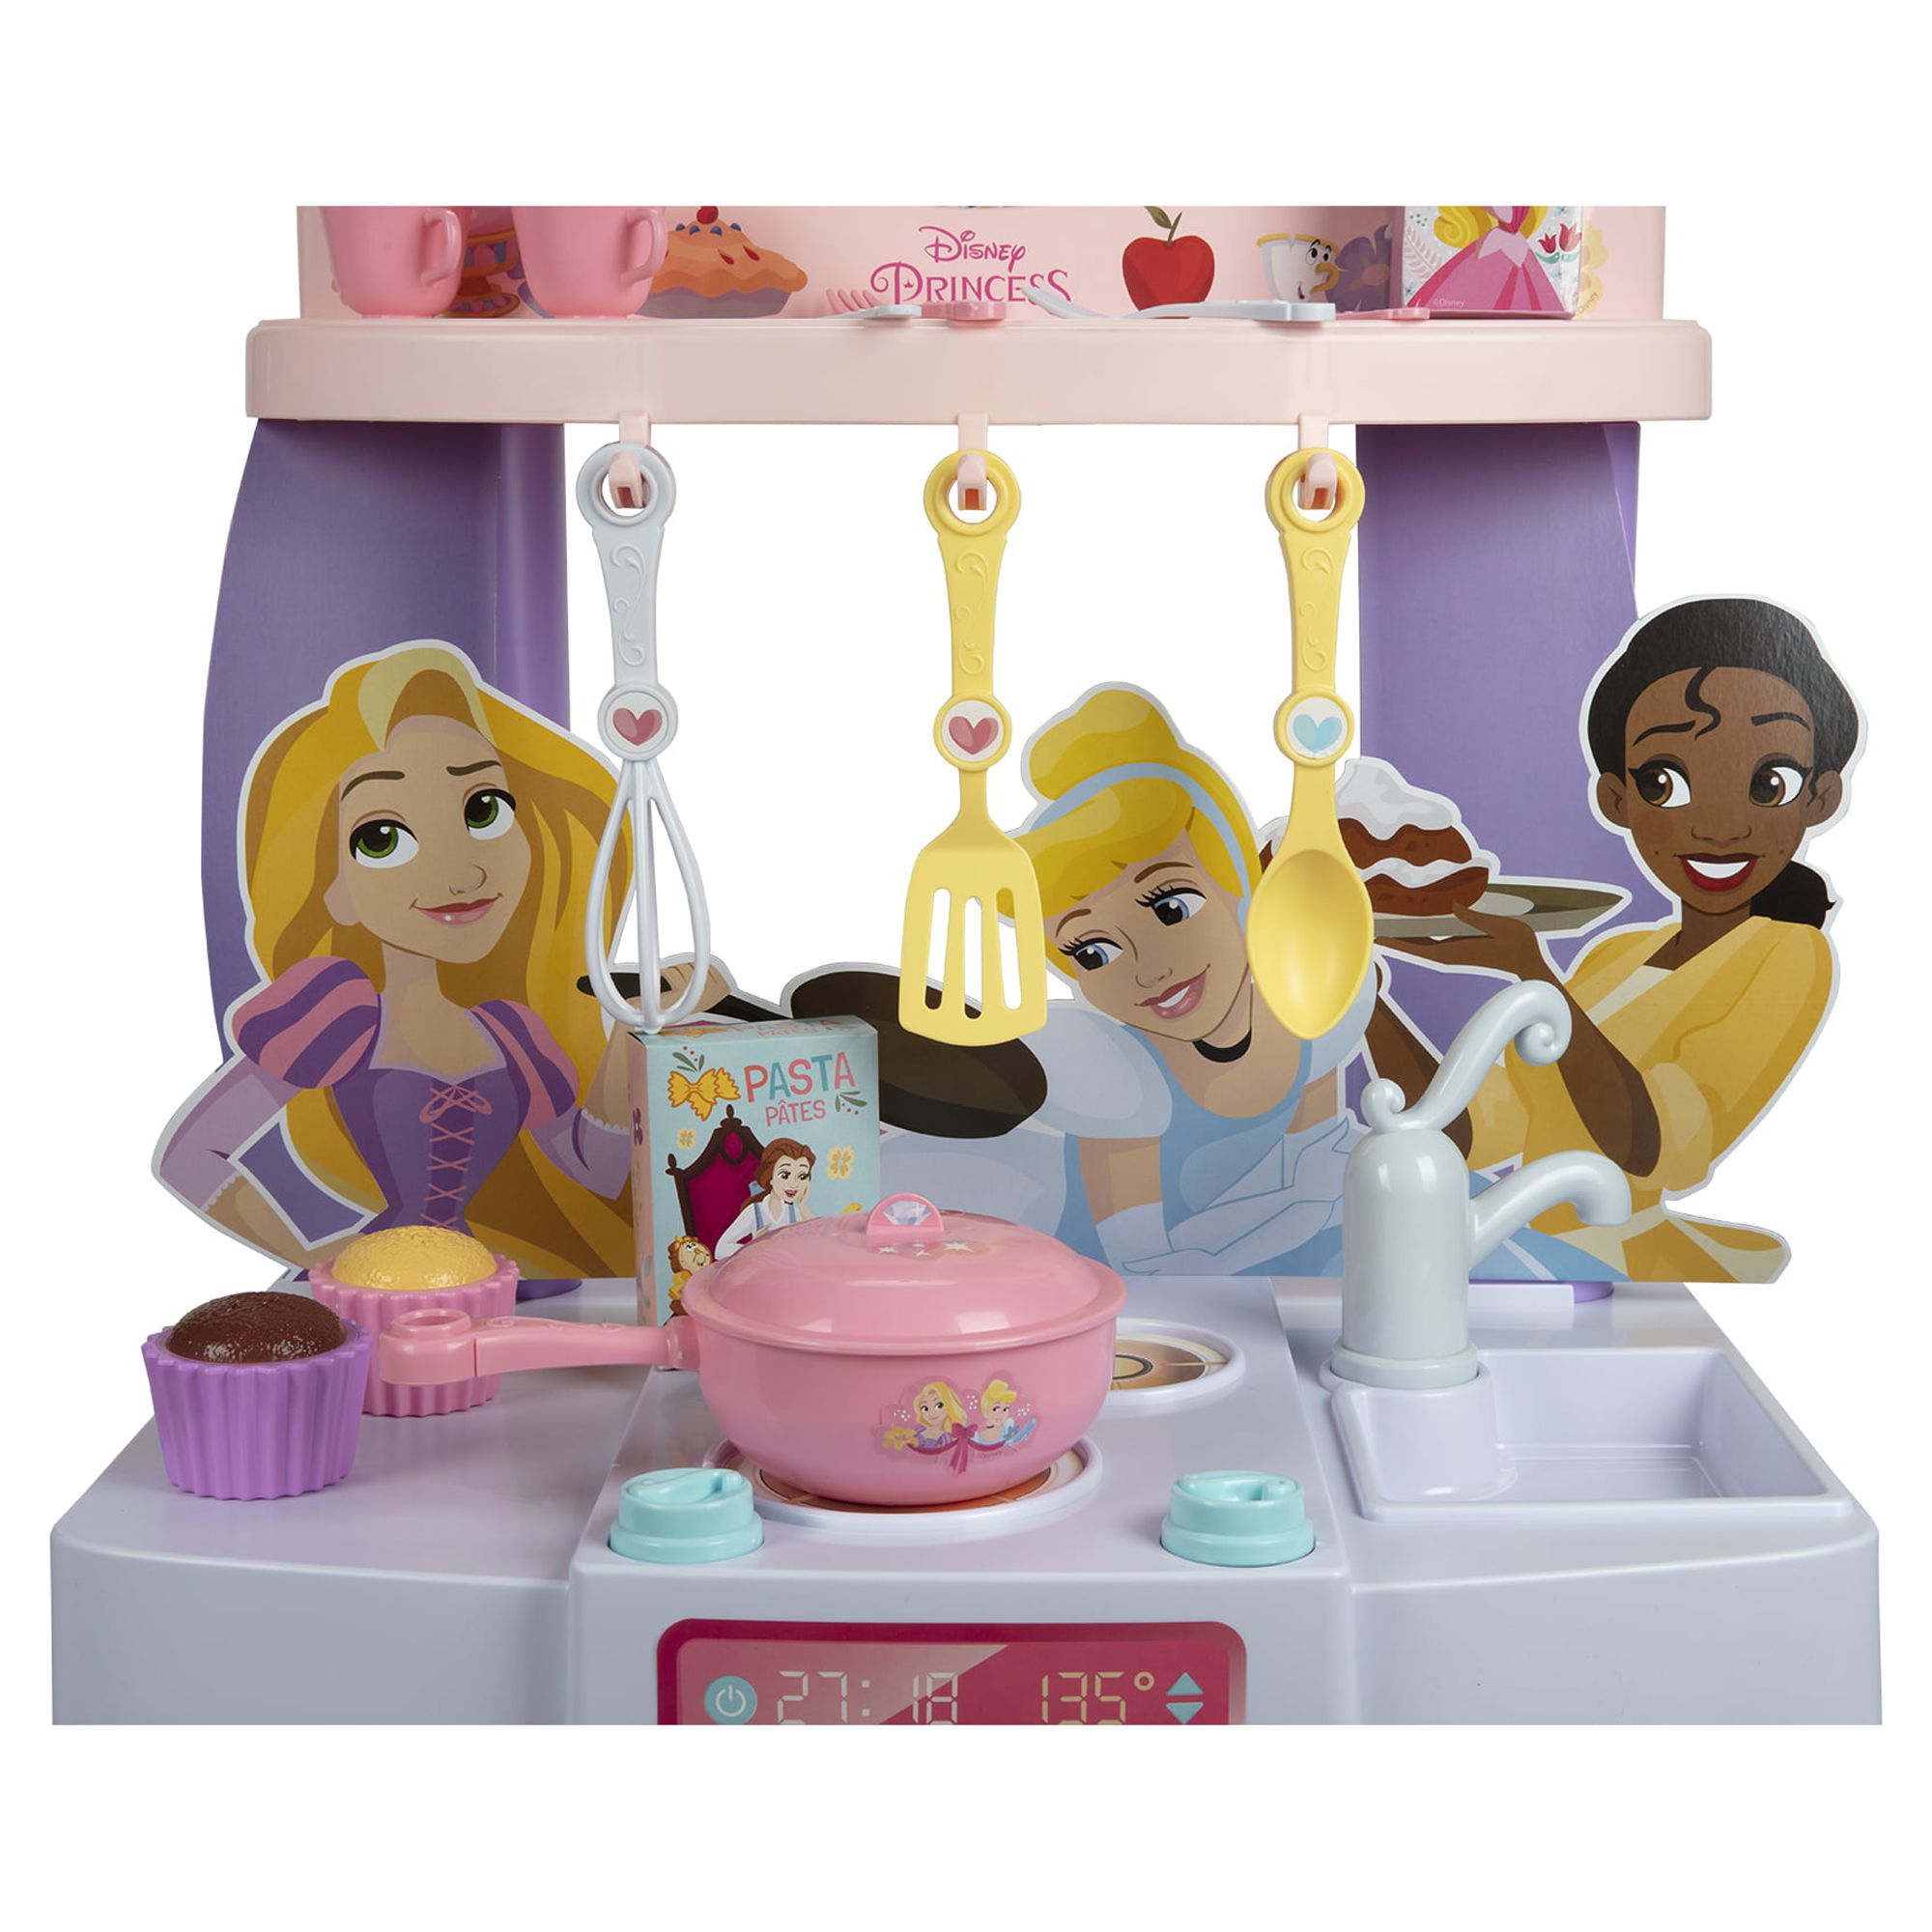 Disney Princess Play Kitchen Includes 20 Accessories, over 3 Feet Tall - image 3 of 6